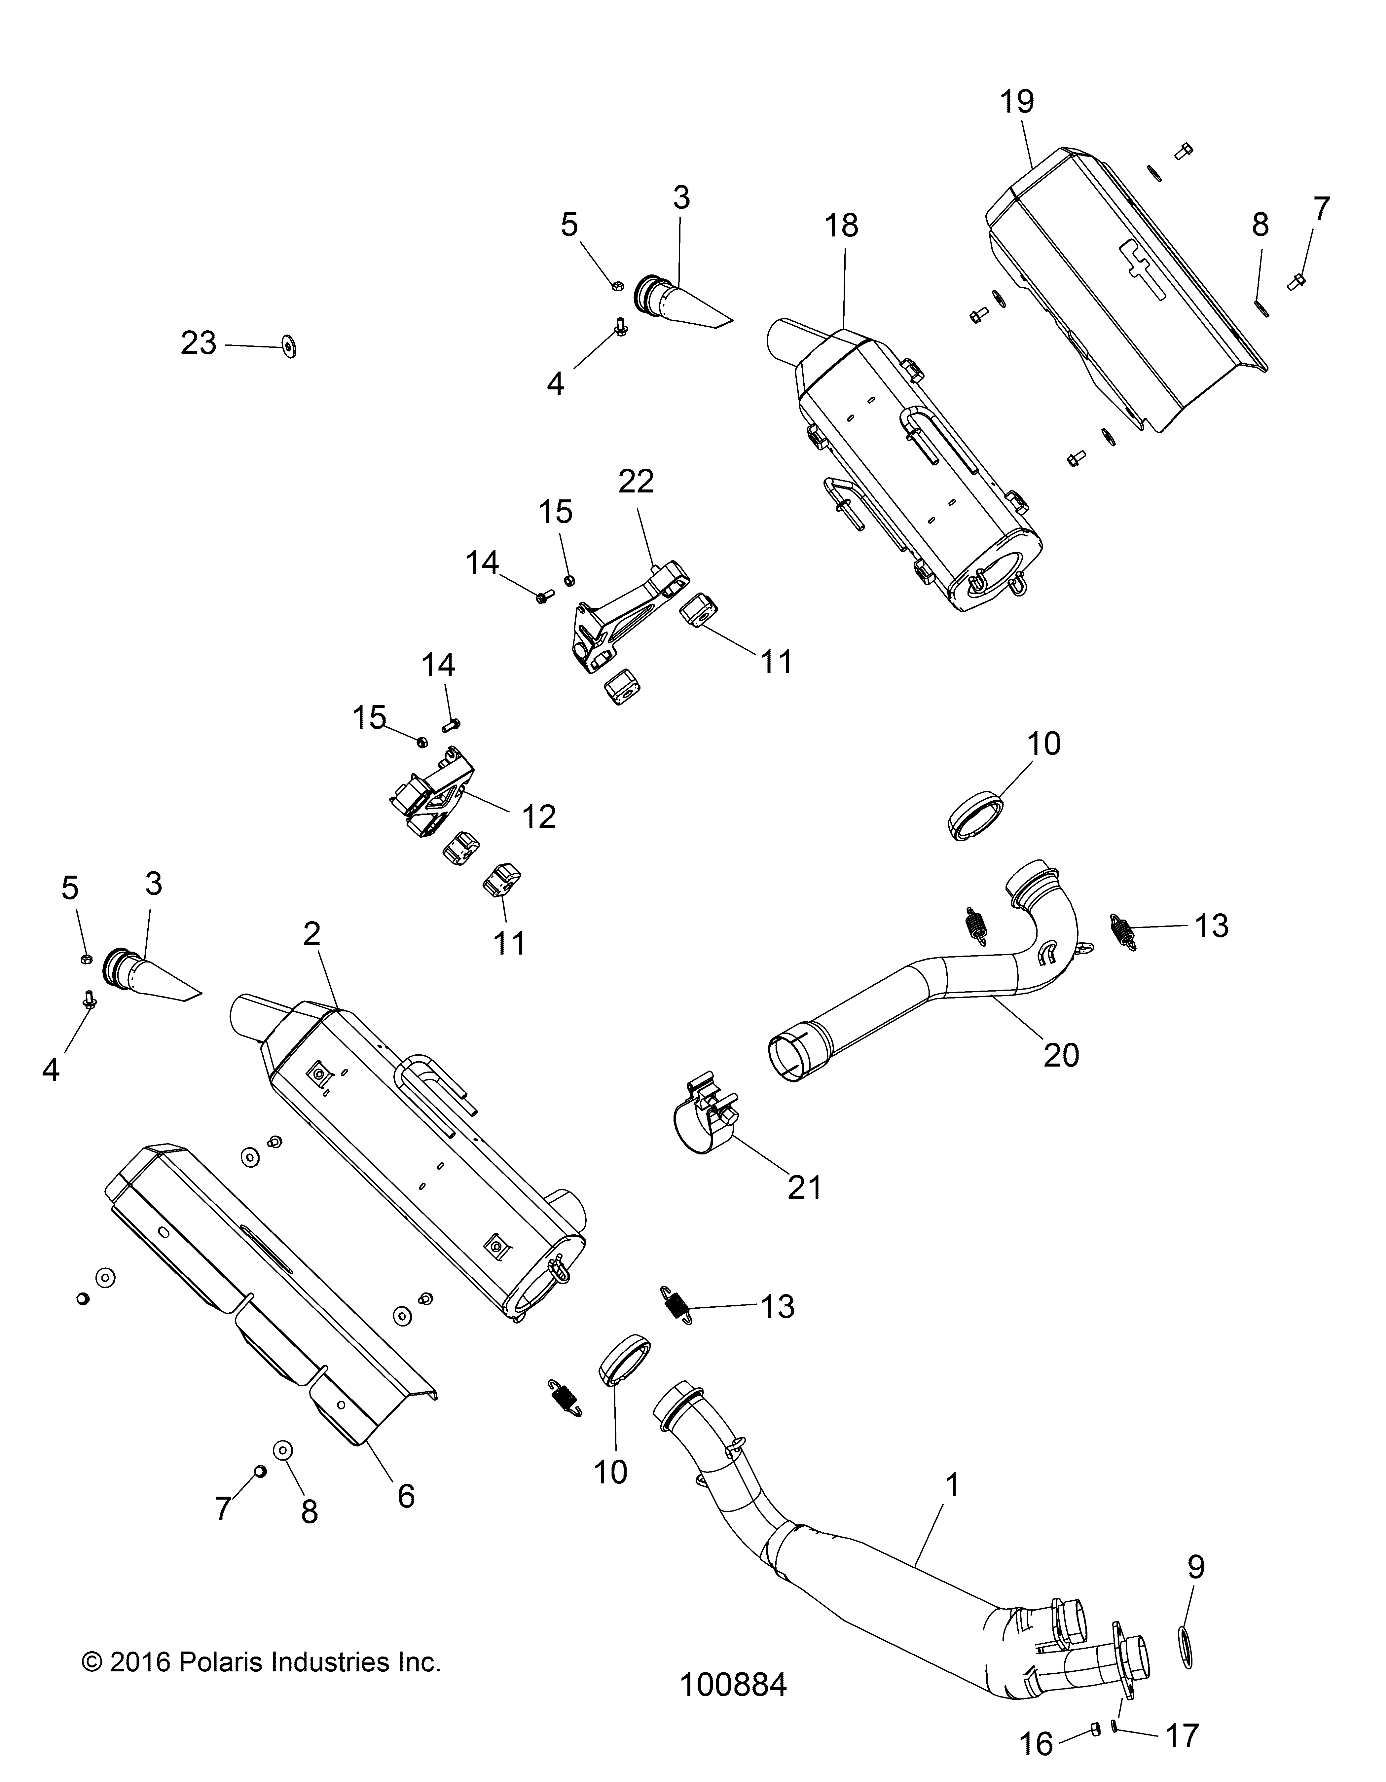 Part Number : 5263605 SHIELD-EXHAUST PRIMARY FRNT ML